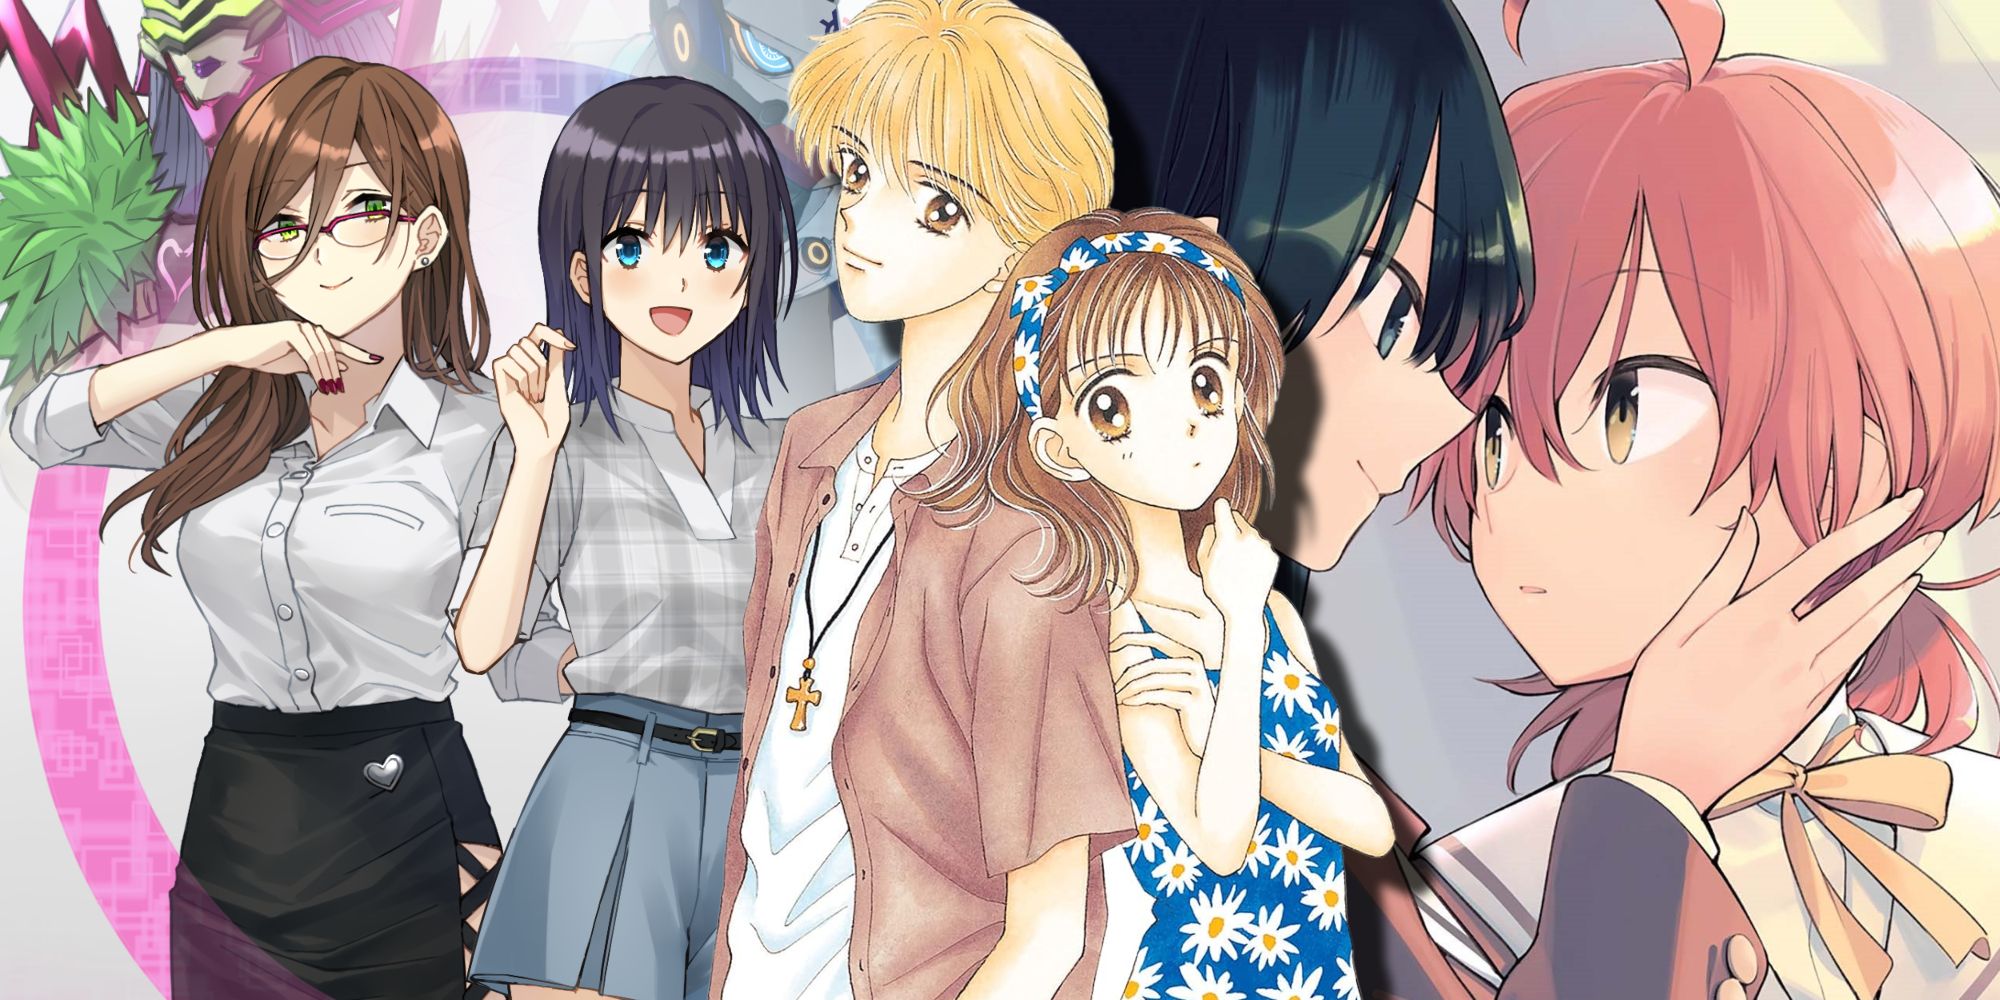 Superwomen in Love, Bloom Into You, and Marmalade Boy in a collage style image depicting the main couples from each series.